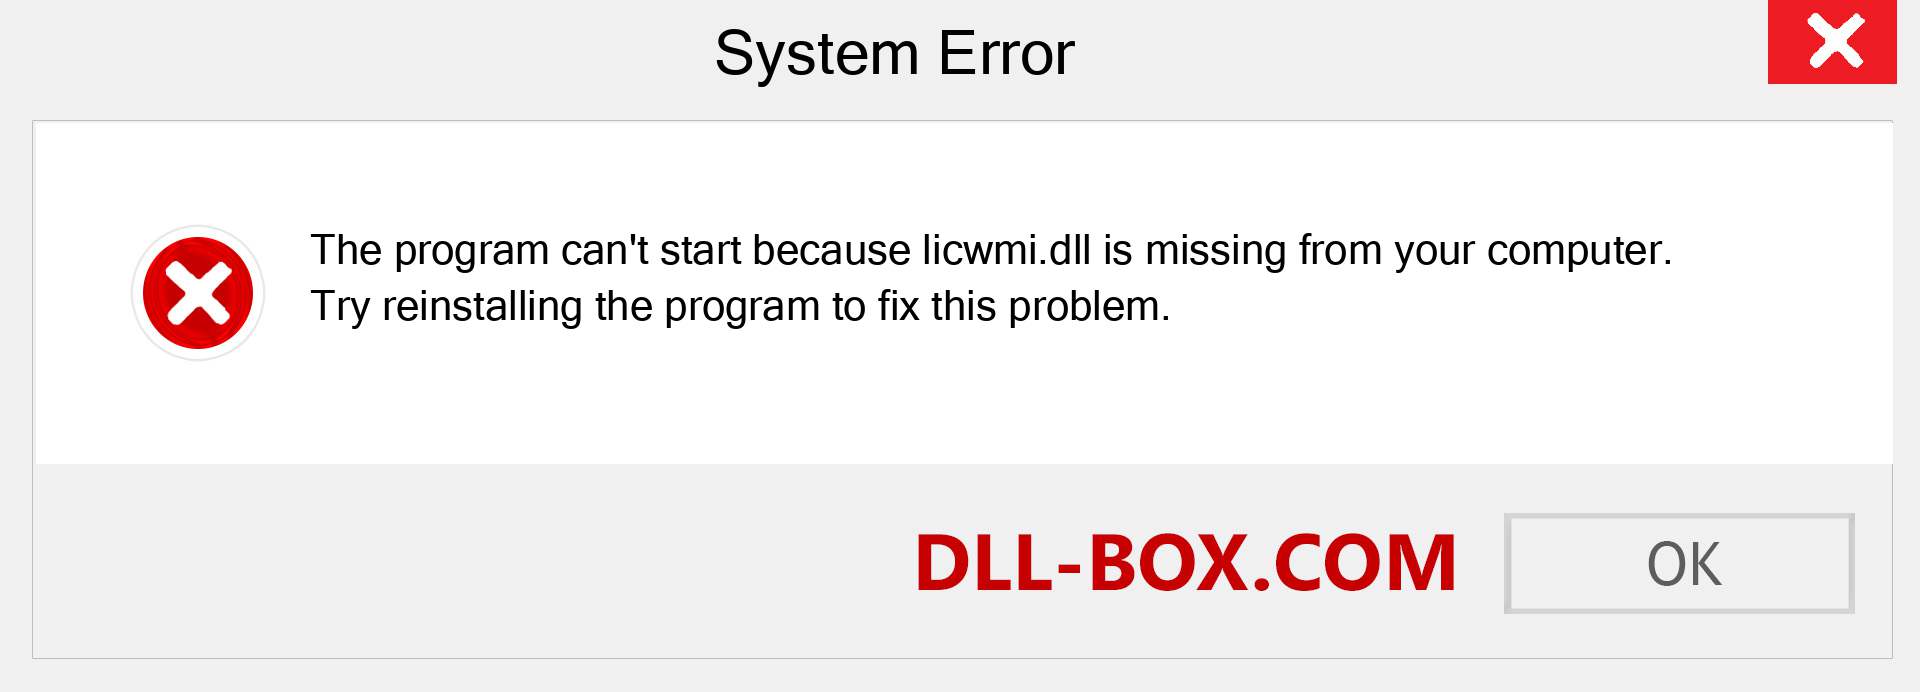  licwmi.dll file is missing?. Download for Windows 7, 8, 10 - Fix  licwmi dll Missing Error on Windows, photos, images